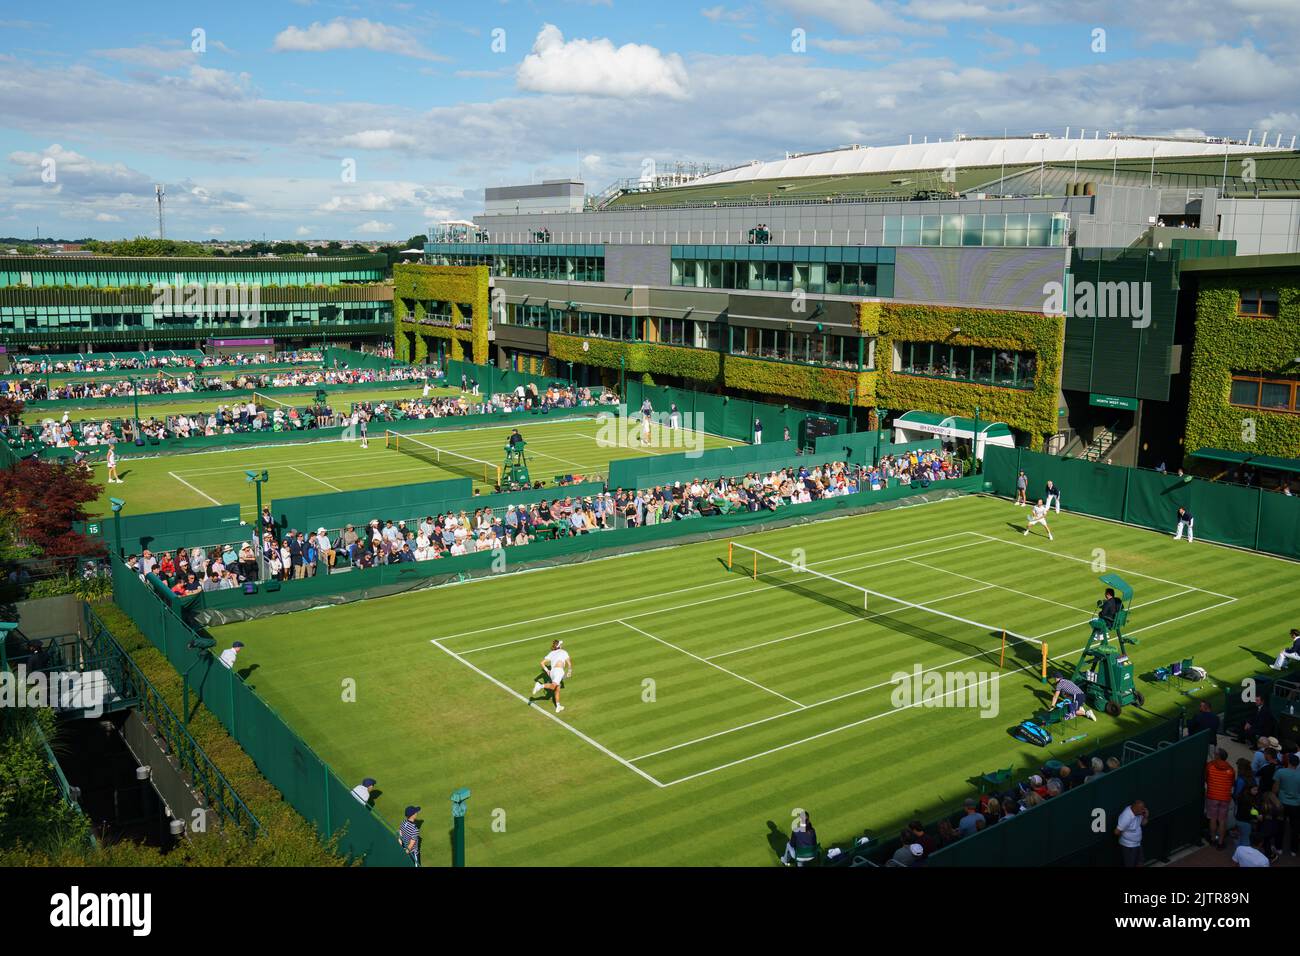 General Views of Court 14 with Adrian Mannarino and Max Purcell at The Championships 2022. Held at The All England Lawn Tennis Club, Wimbledon. Stock Photo